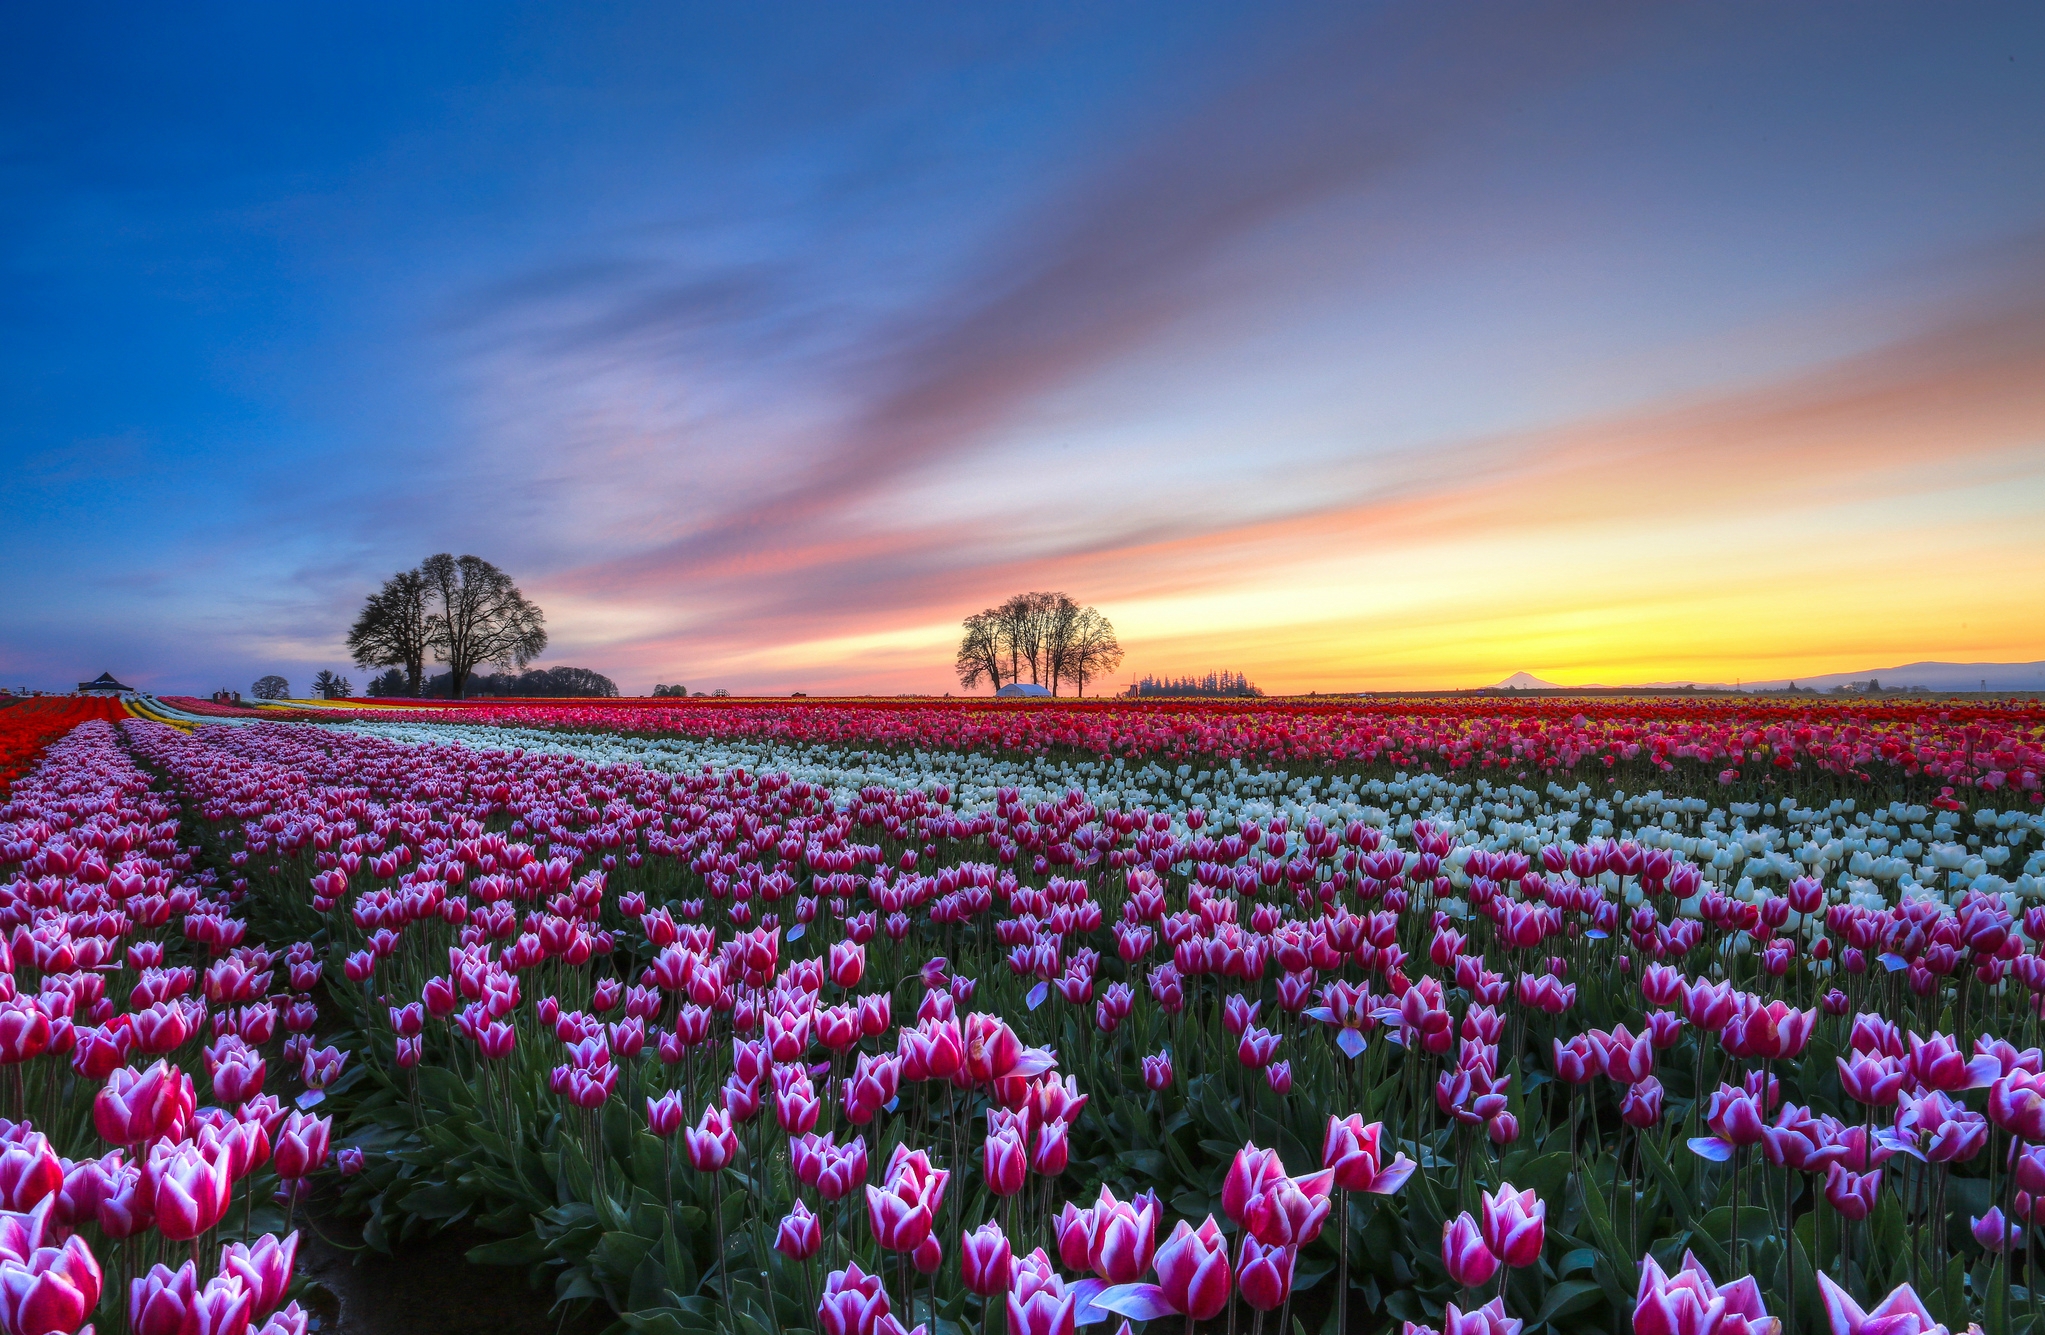 Free HD nature, trees, tulips, sky, multicolored, evening, flowers, sunset, clouds, field